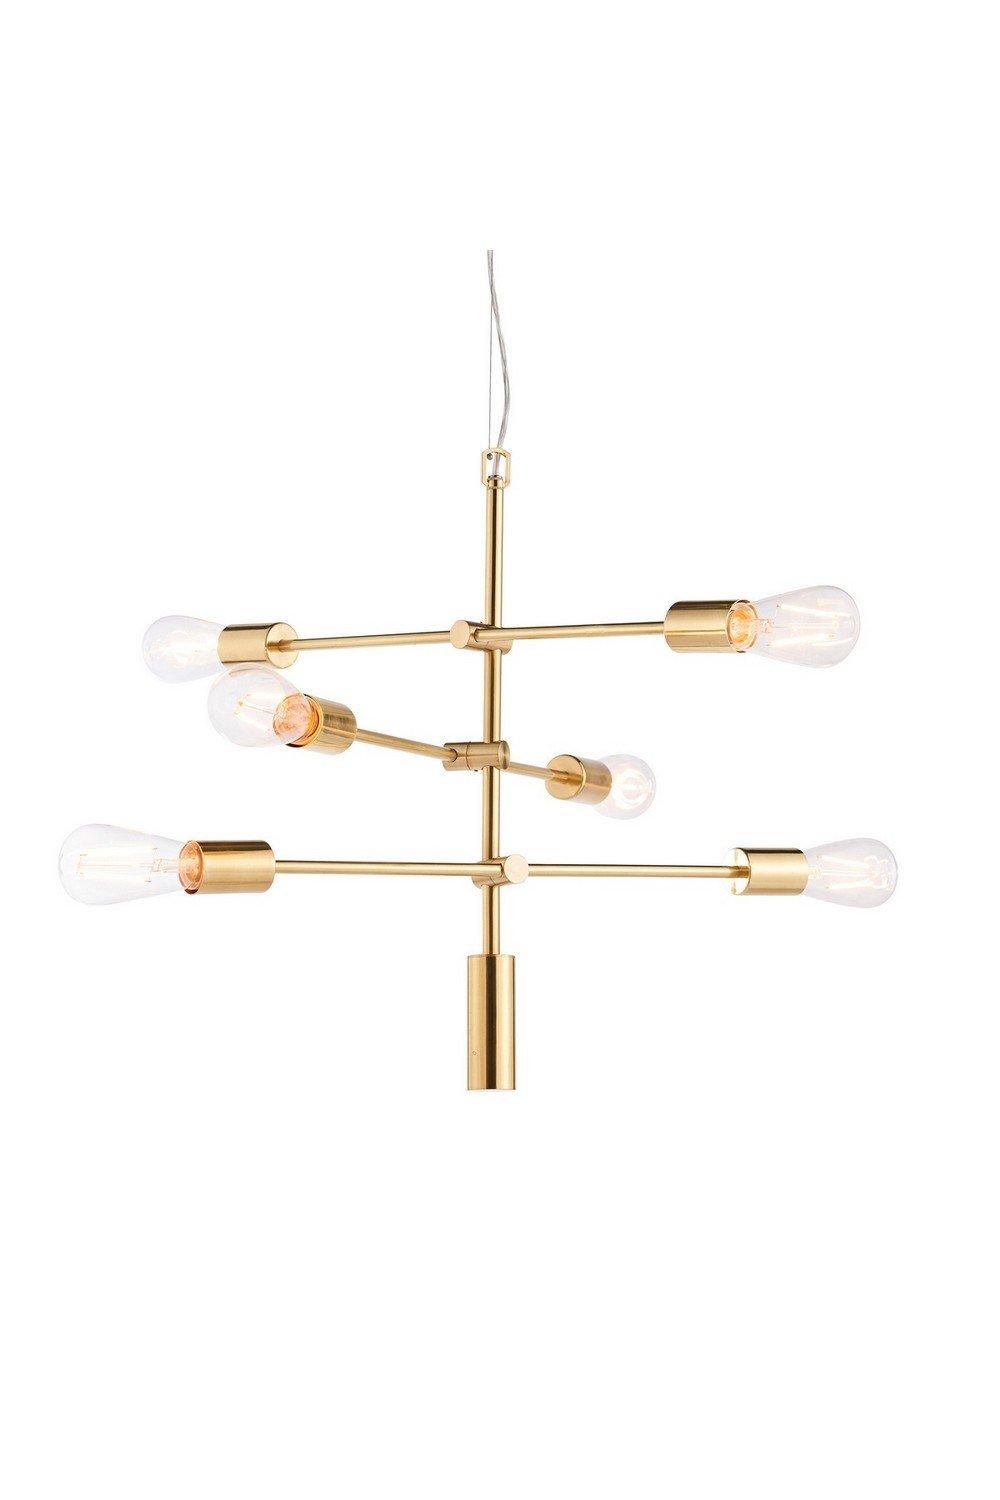 Rubens Pendant Satin Brushed Gold Effect Plate 6 Light Dimmable IP20 E27